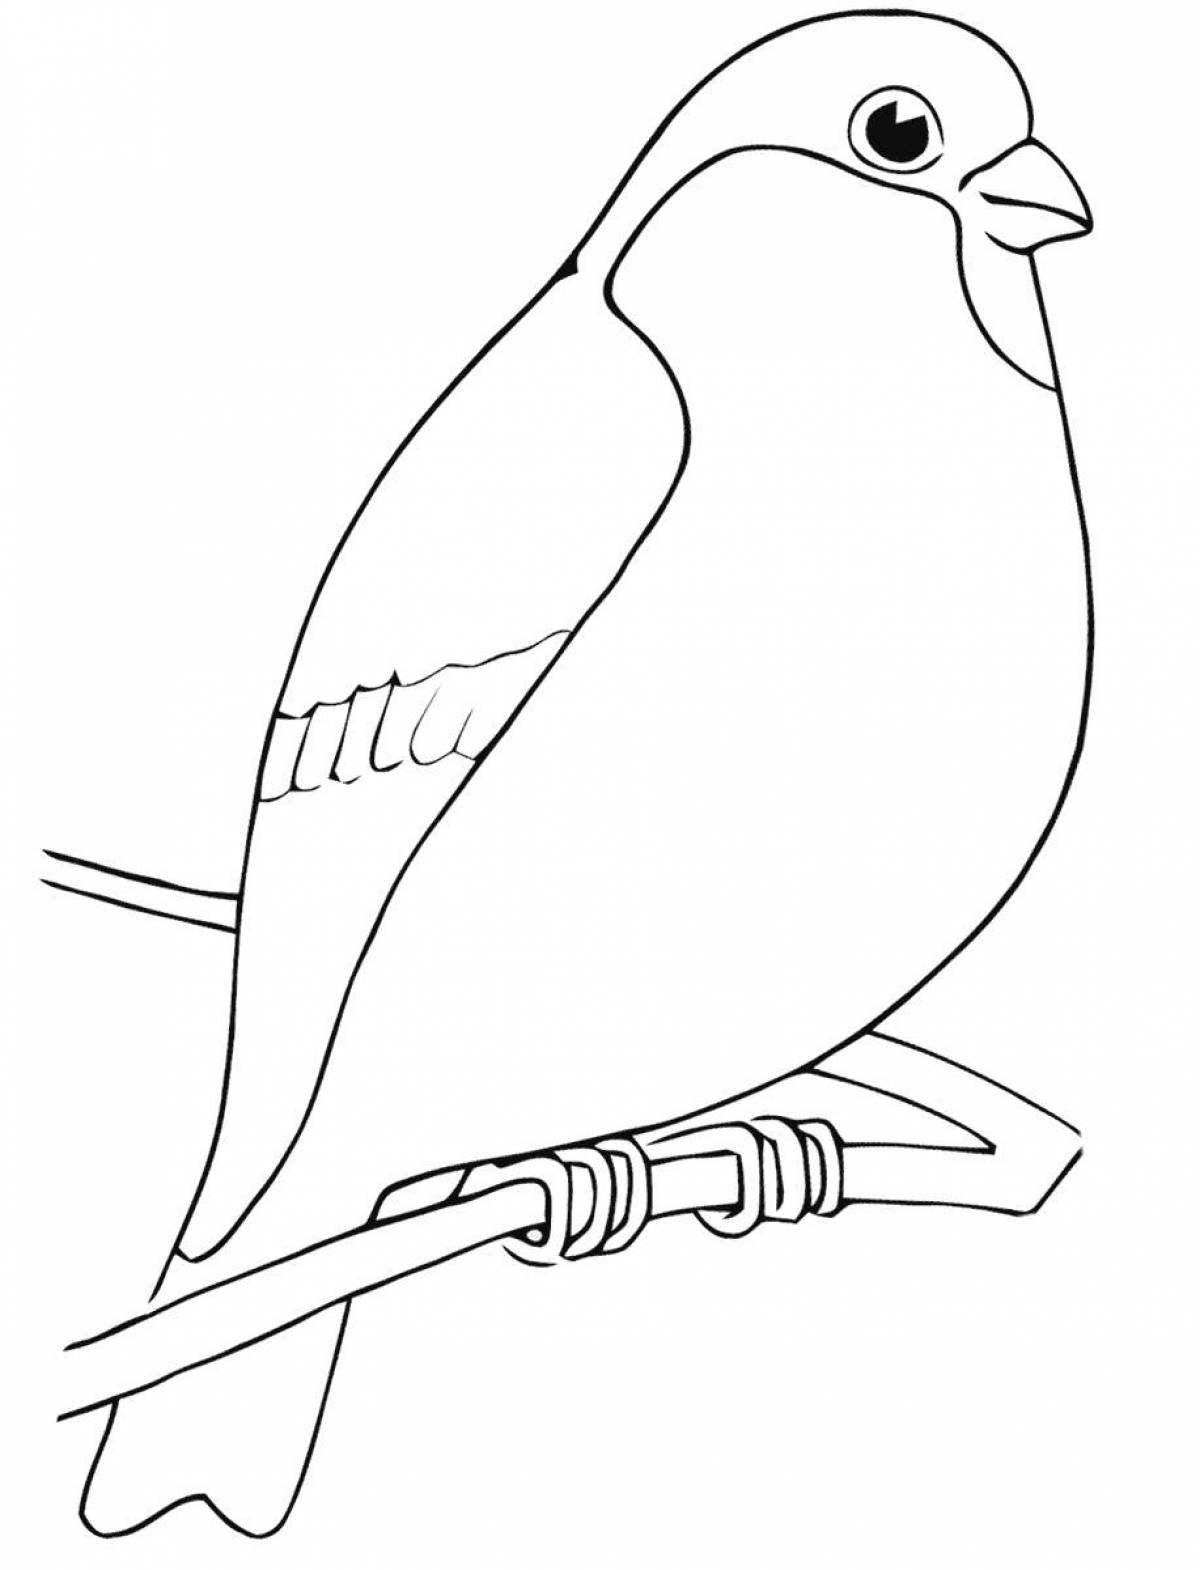 Amazing winter bird coloring pages for kids